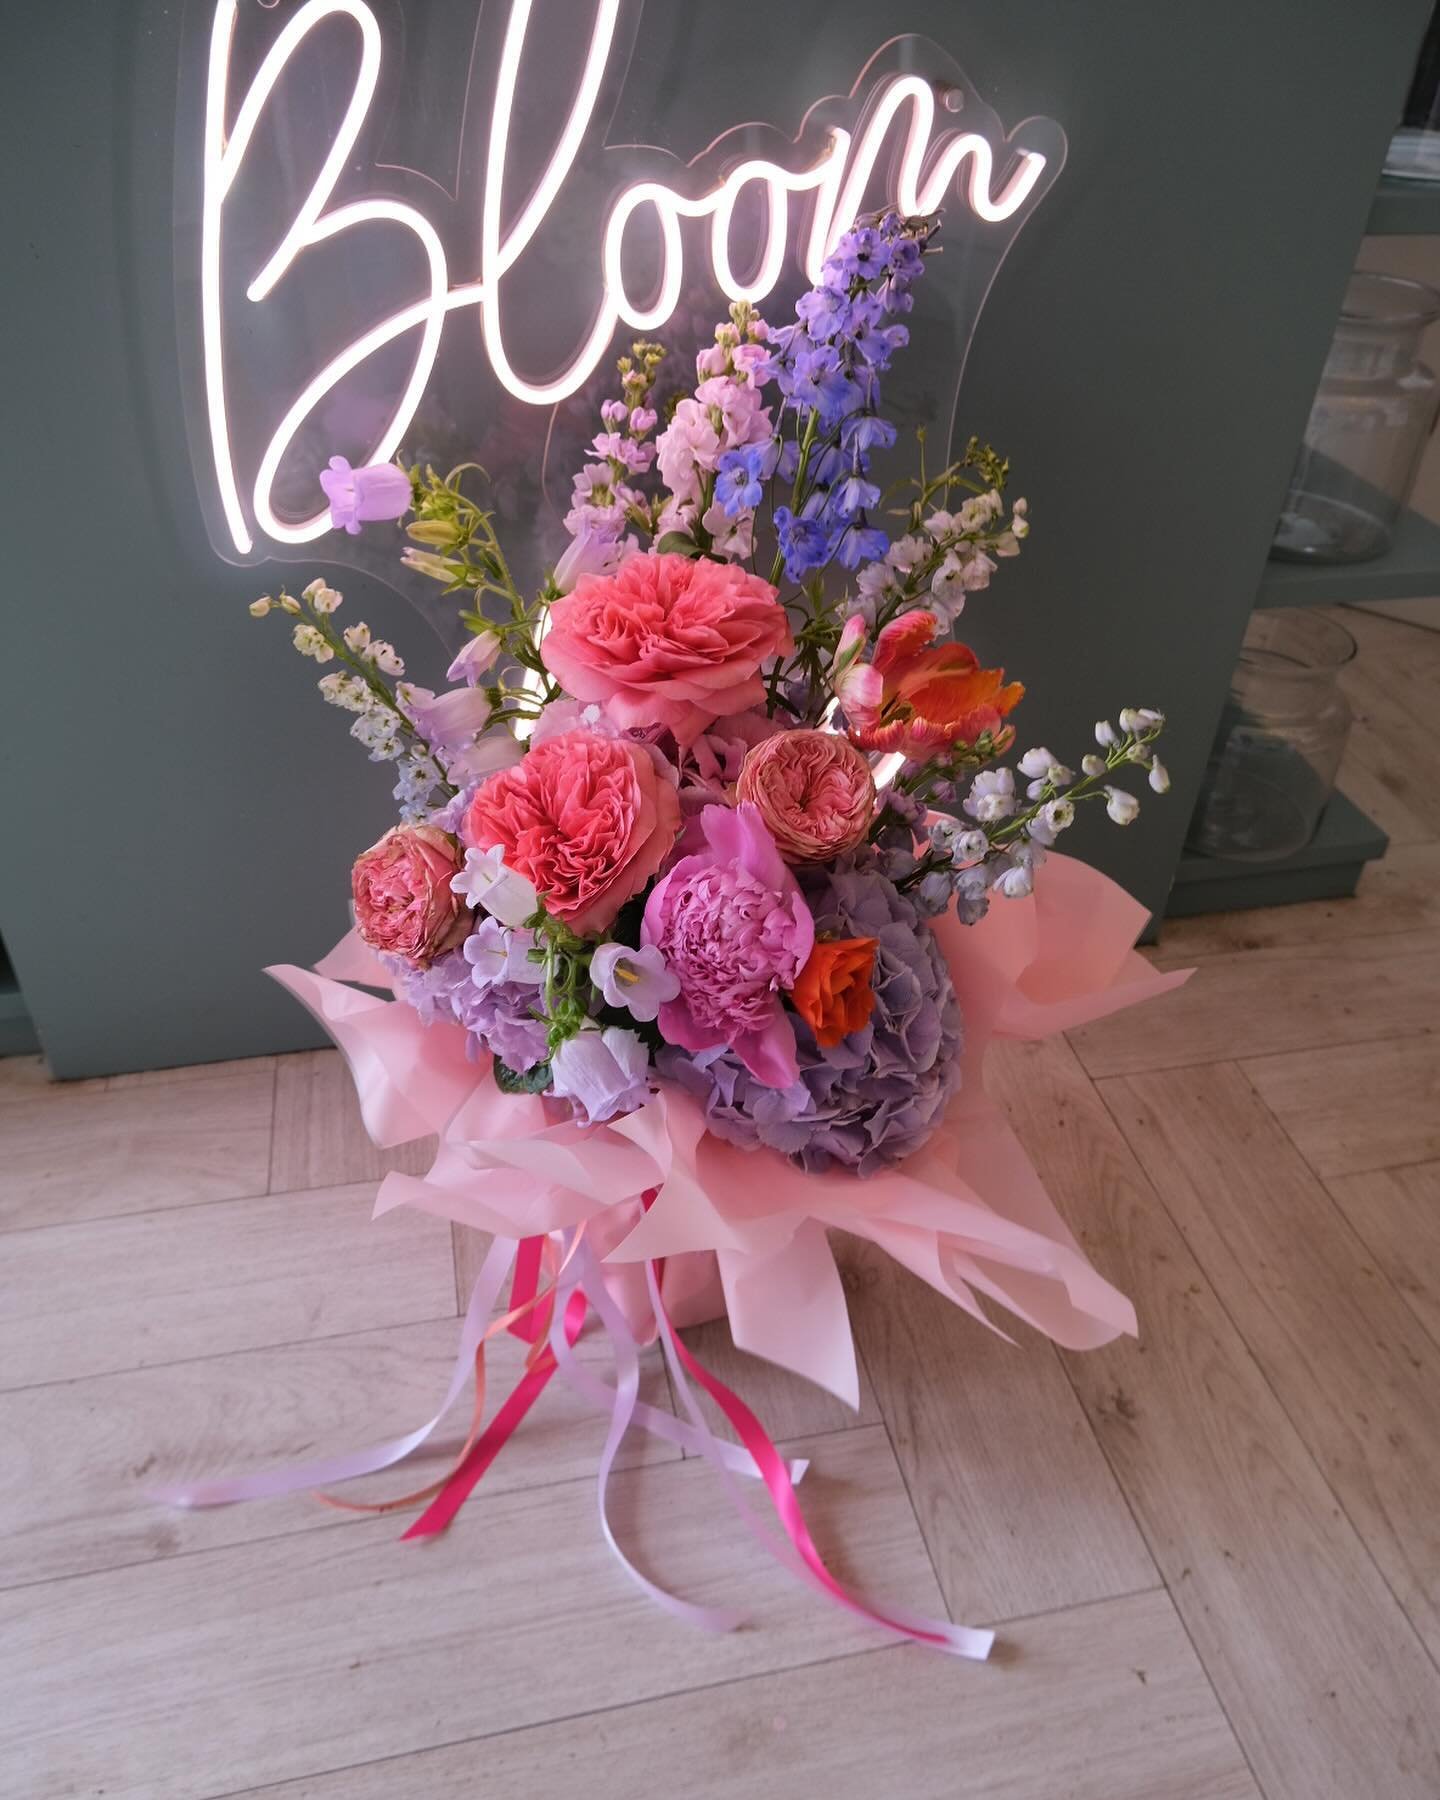 ☀️ Vibes of Summer Bouquet ☀️ 

Our weekly flower design is packed full of colour and now available to order online! 

There are 2 sizes to choose from and include peonies, coral roses, campanula, British tulips, stocks, delphinium and ranunculus! 

